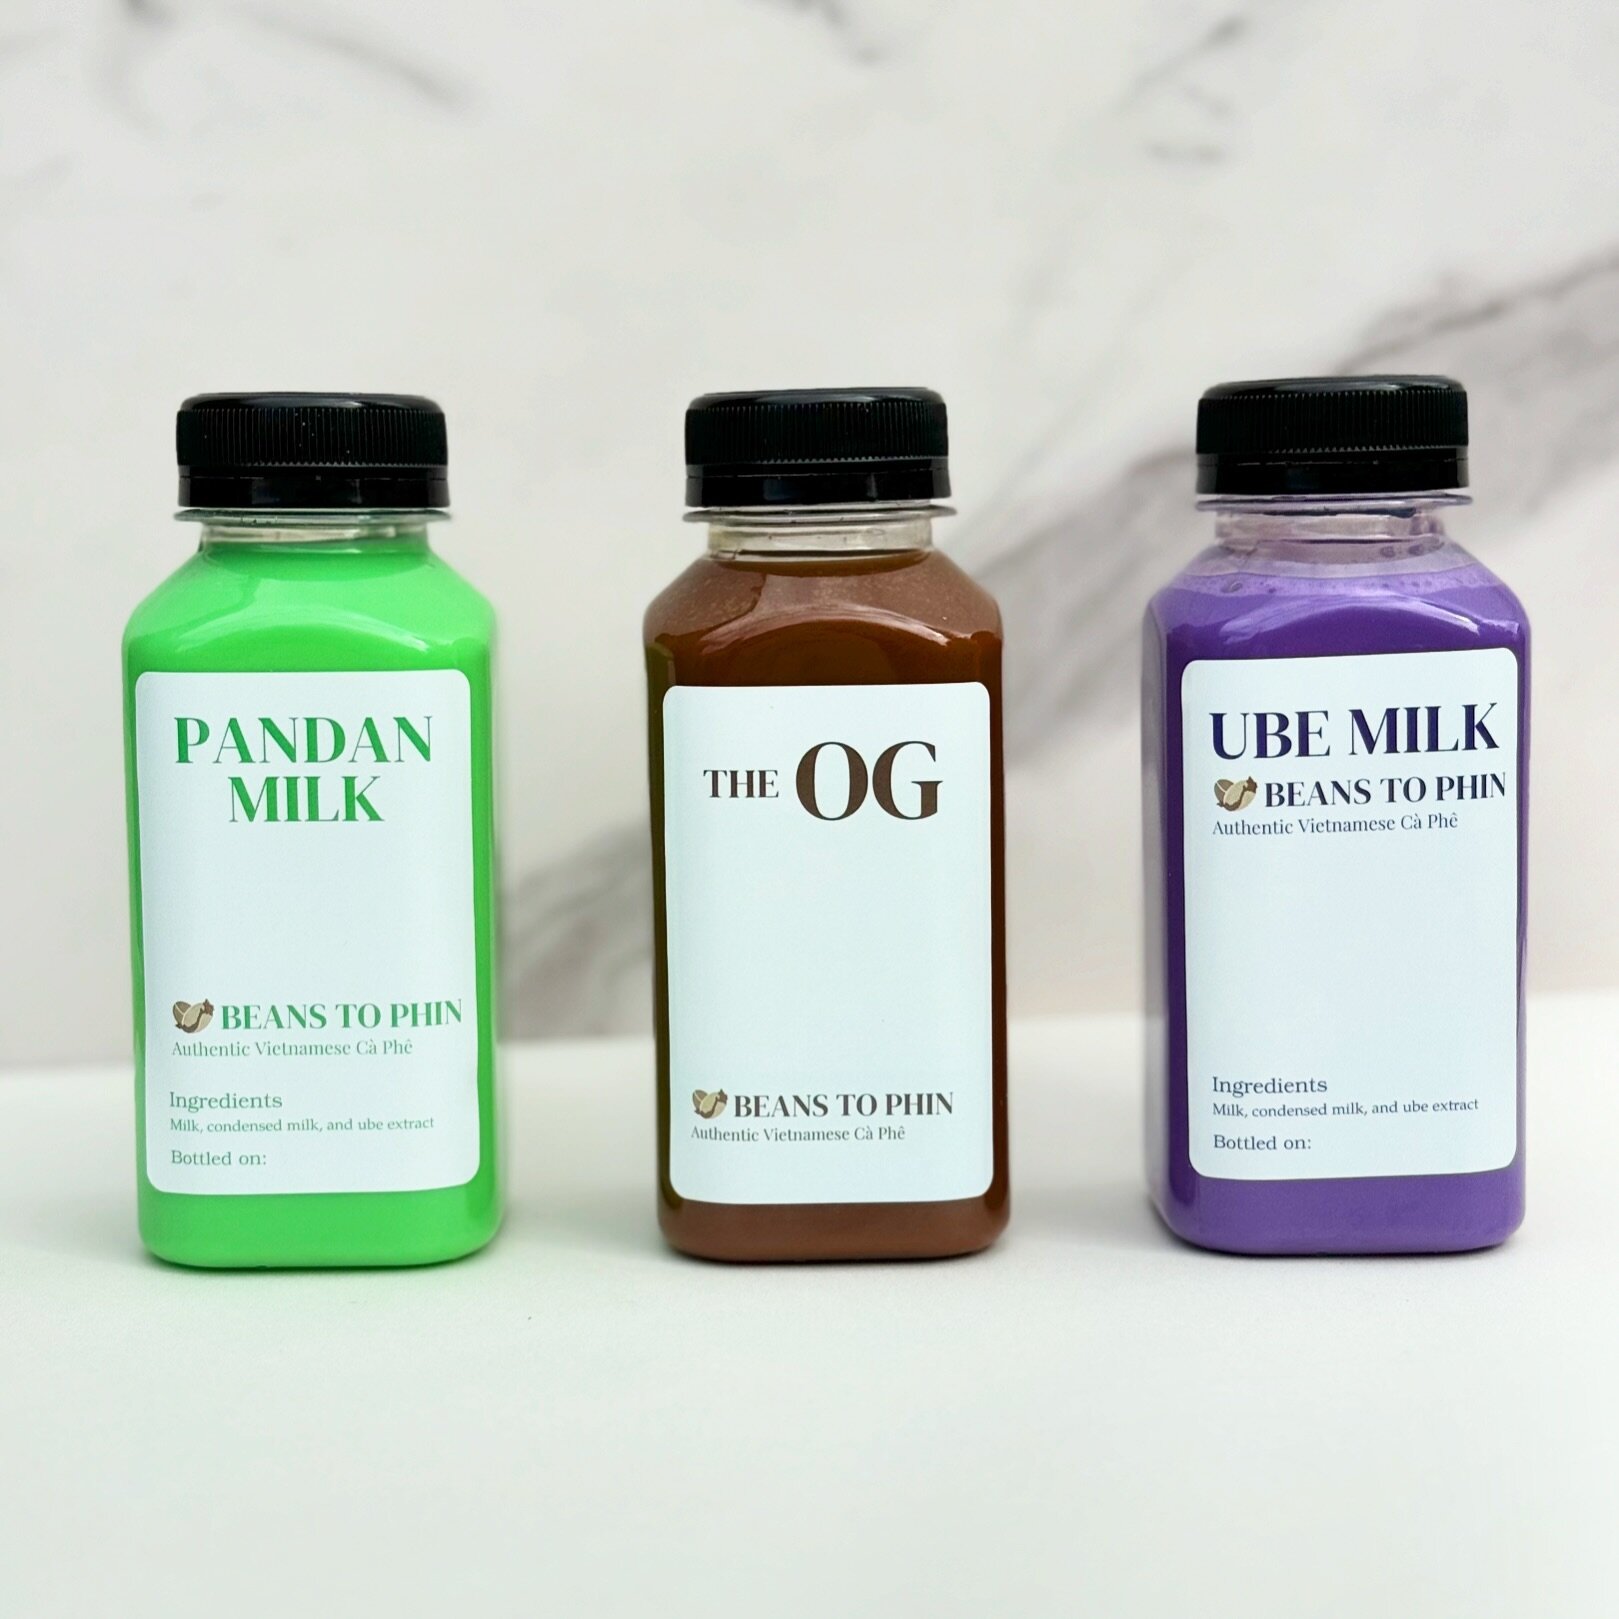 We are doing PRE-ORDERS for The OG 🤎, Ube milk 💜,and Pandan milk 💚

✨Must have orders in by this Thursday 3/28.
📲DM us to put your order in and pick up at our pop-up this Saturday, details below 👇🏻 

⏰Pick up window 11AM-4PM
📍Lloyd Center Mall